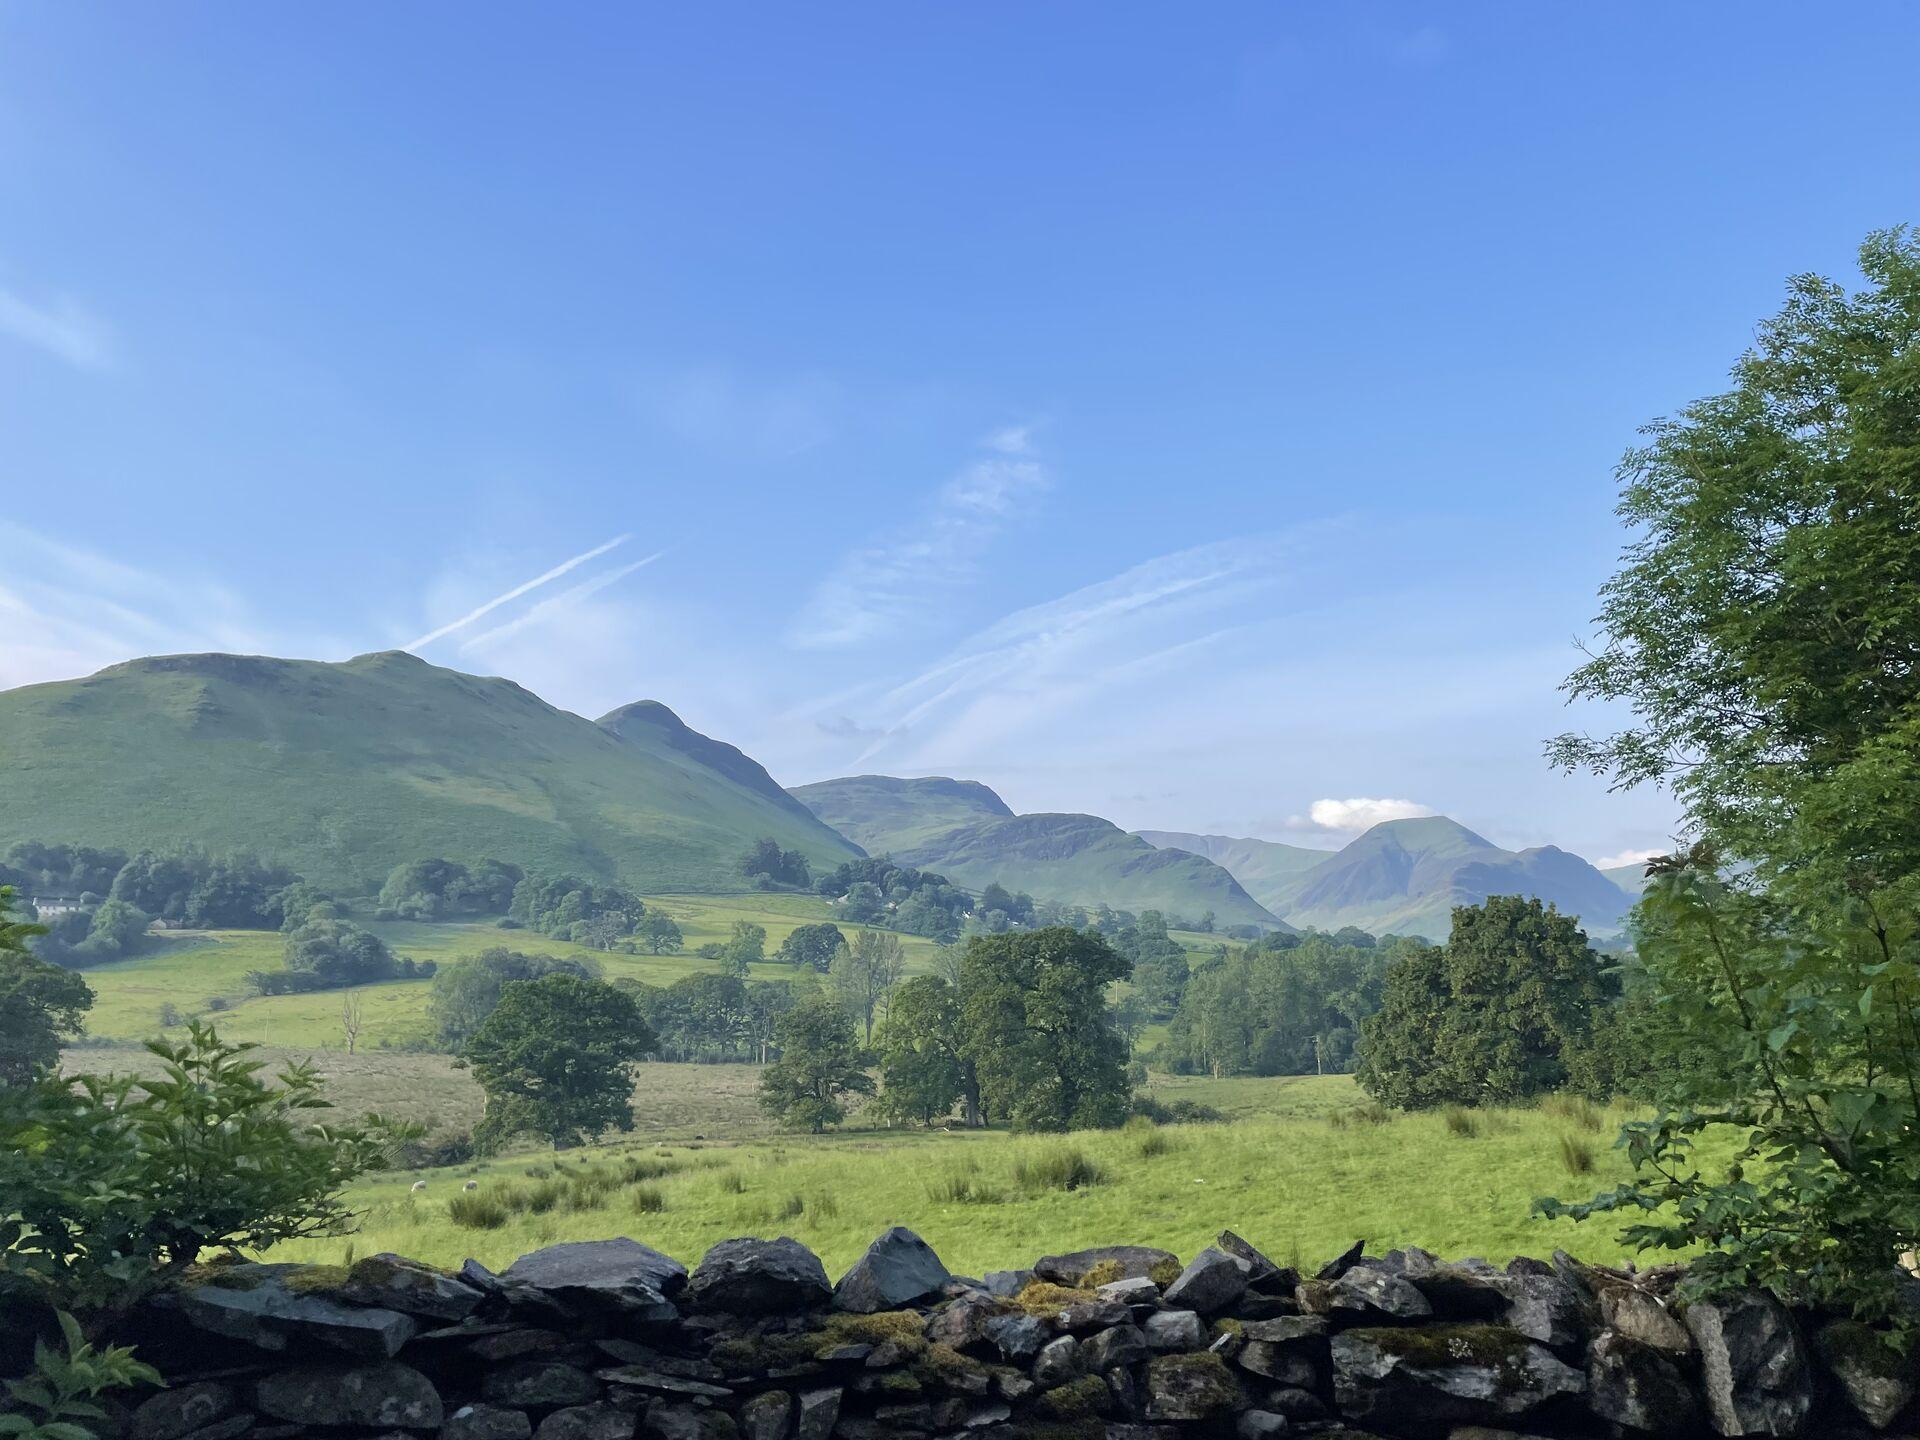 Clear blue skies over the green fells and scattered trees in the fields below Cat Bells and Maiden Moor